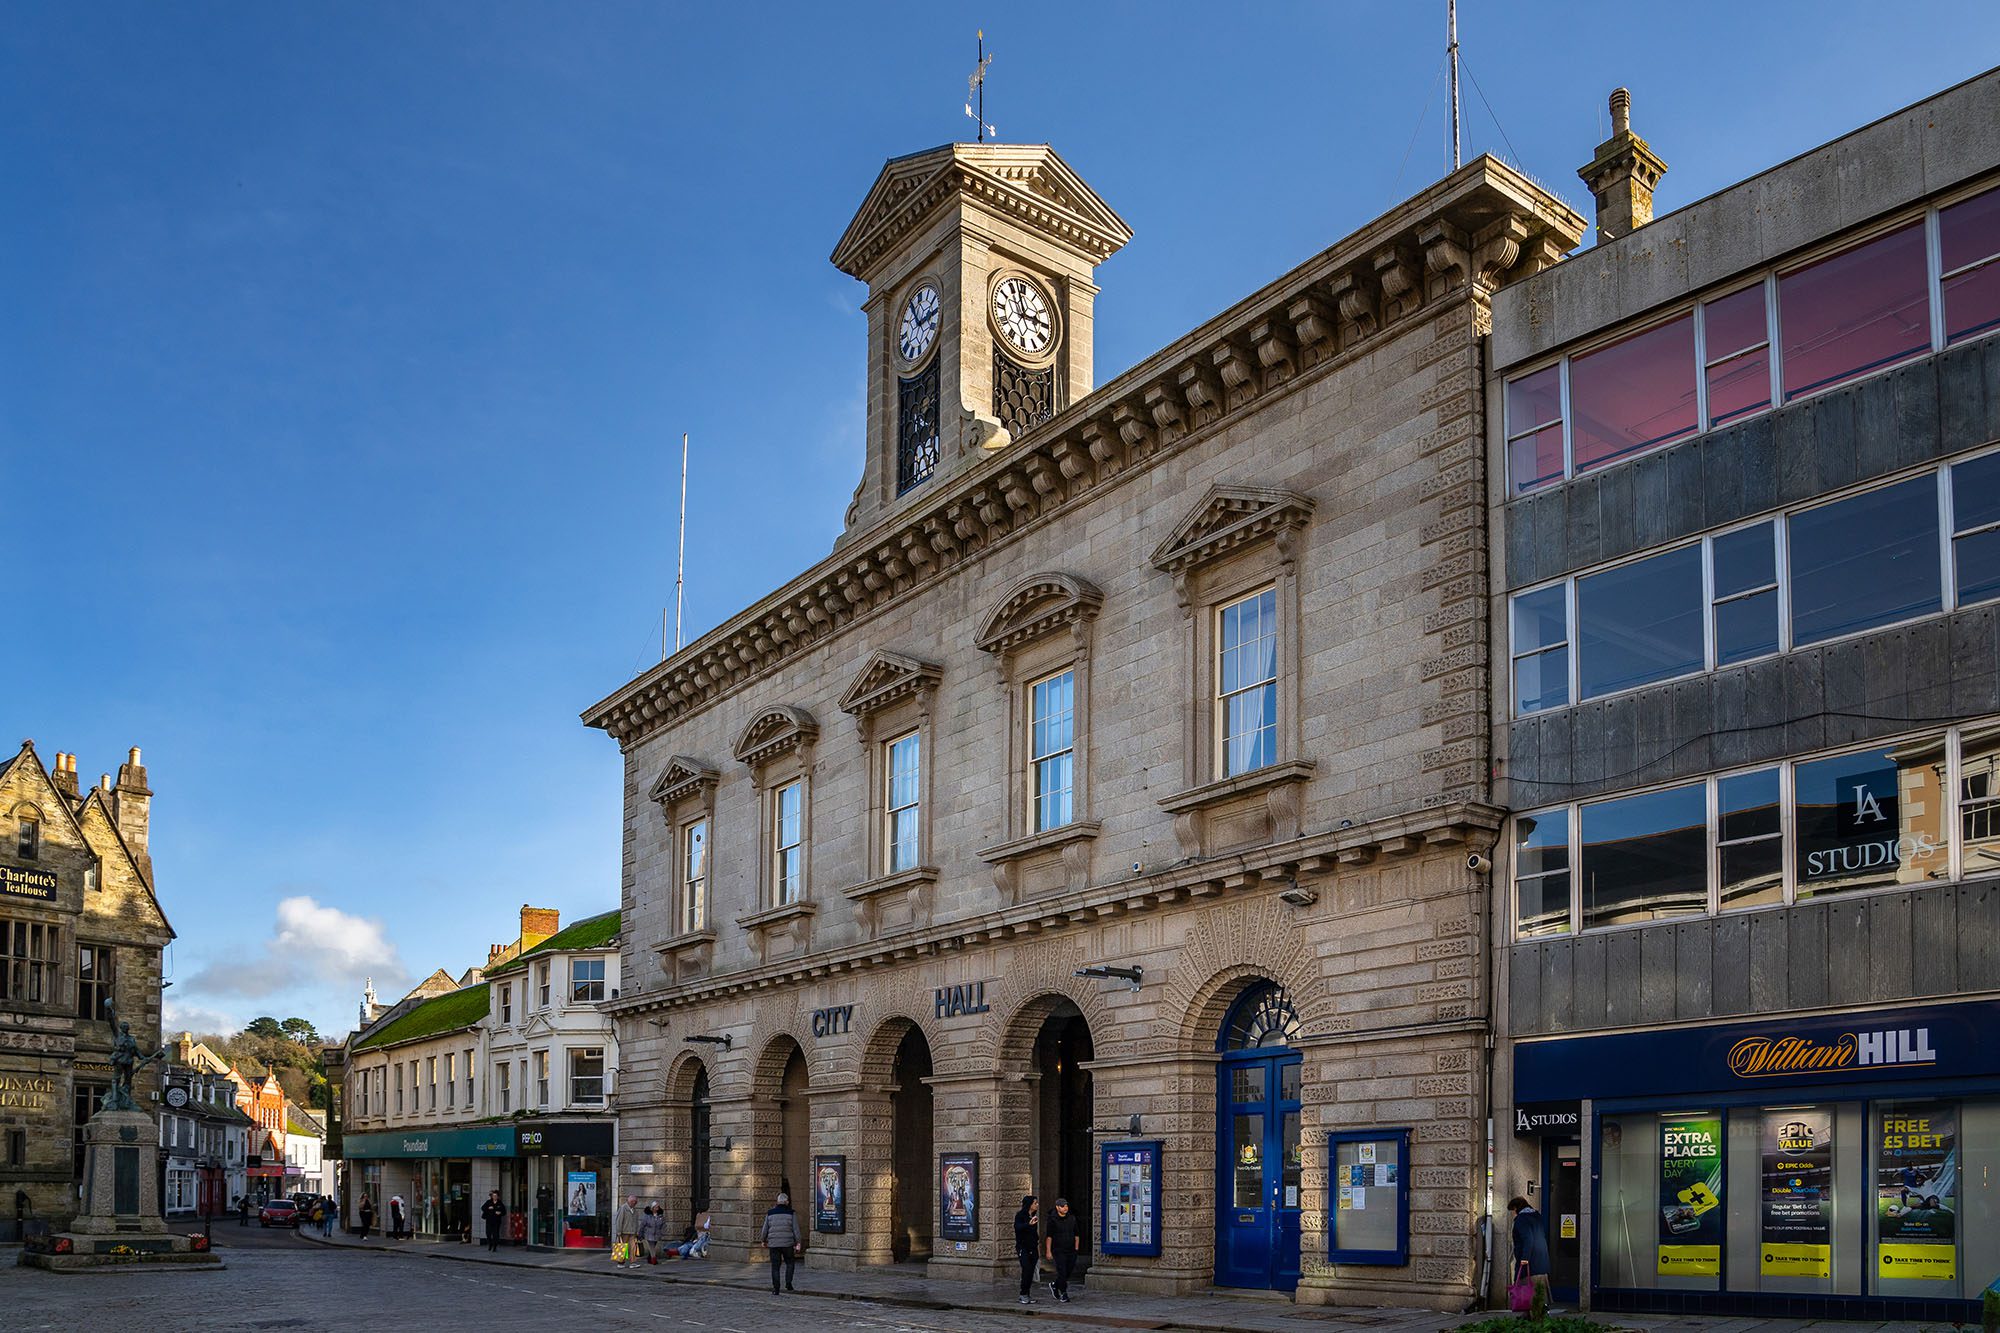 truro city hall clock tower featured image